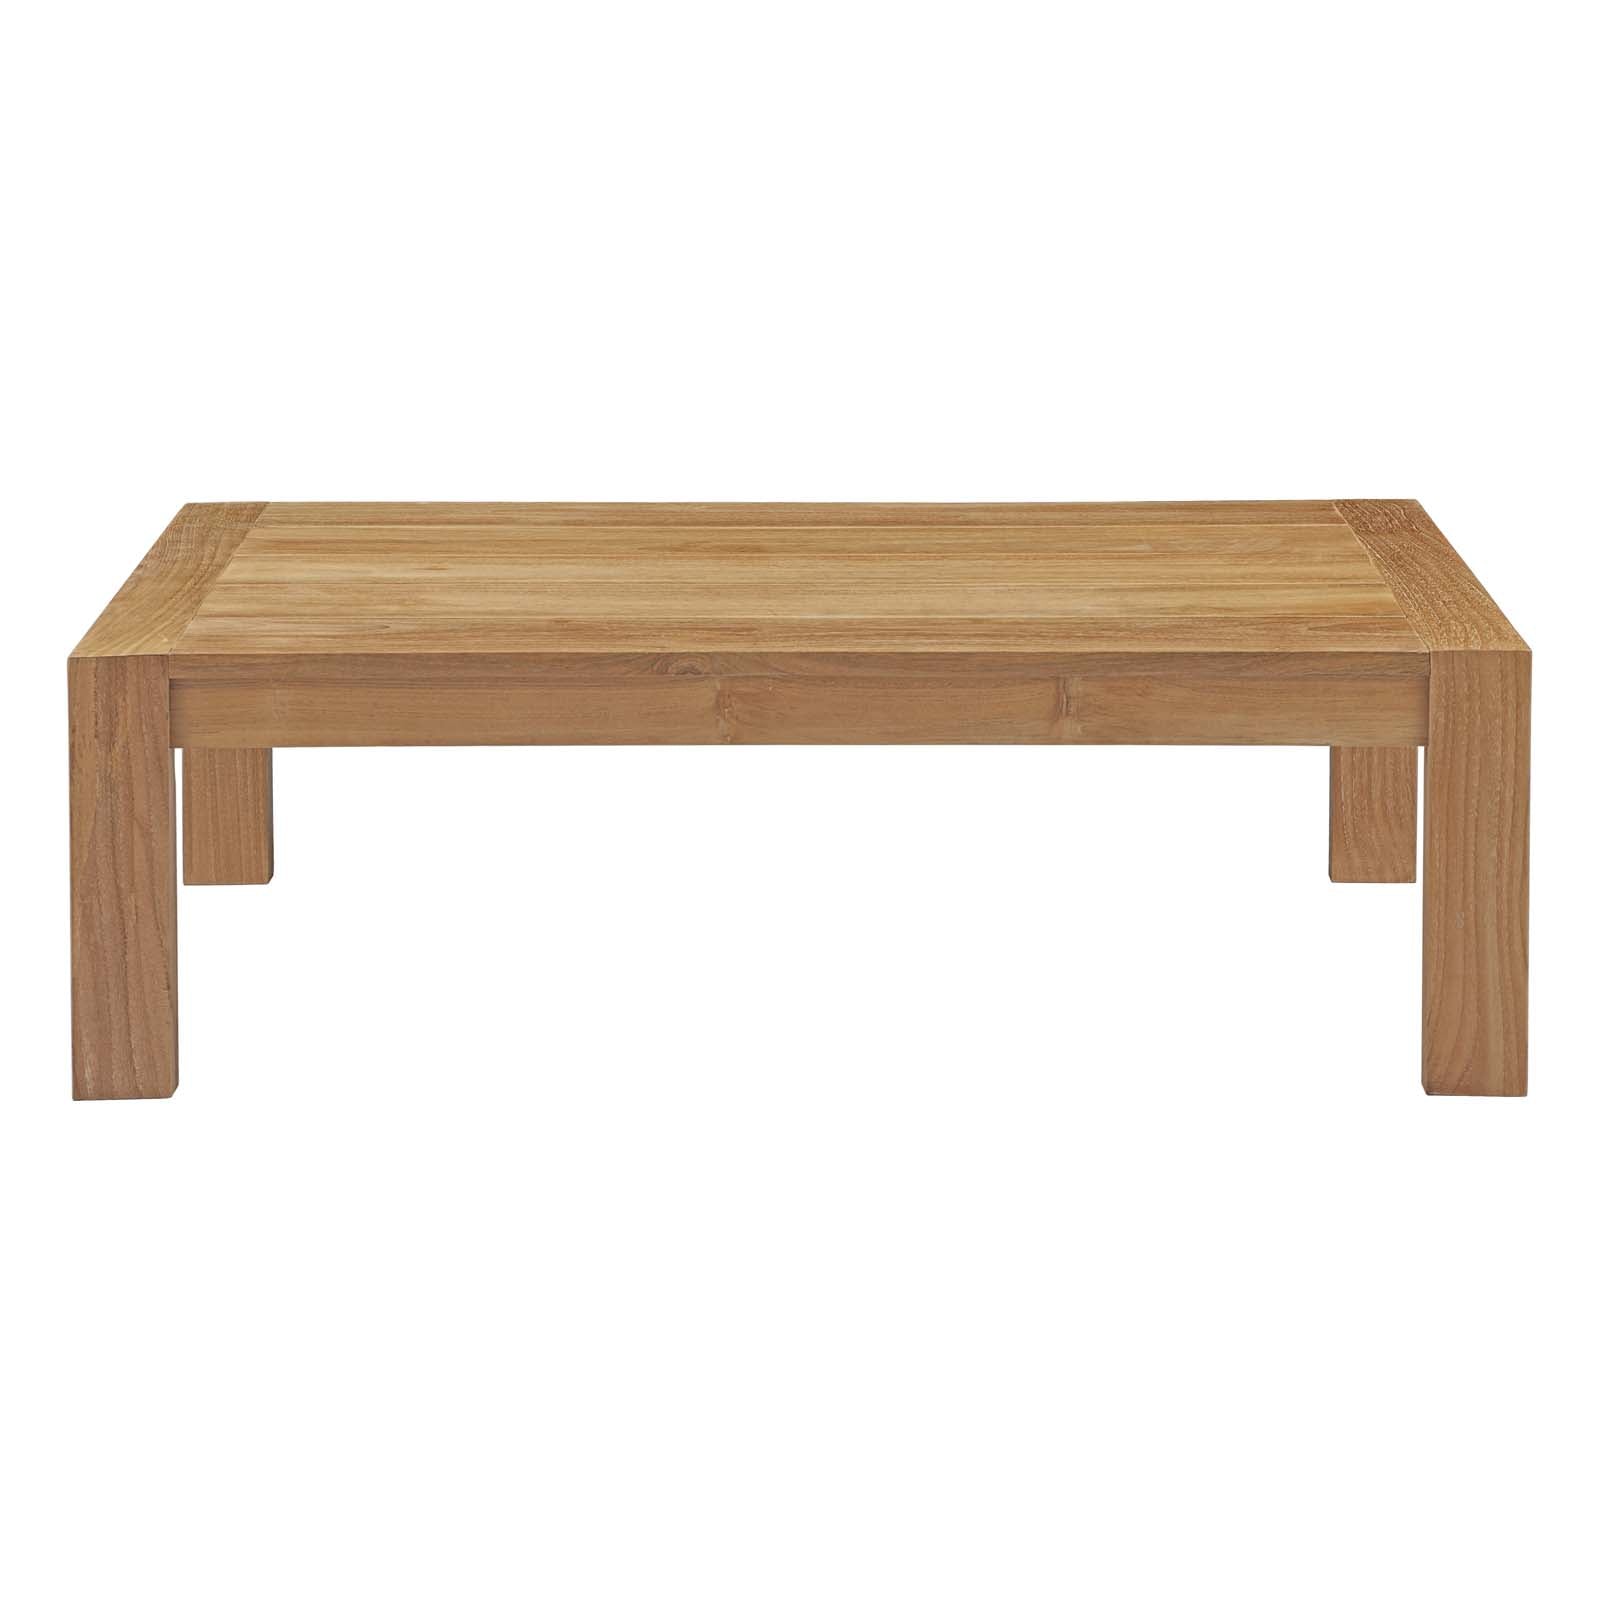 Upland Outdoor Patio Wood Coffee Table